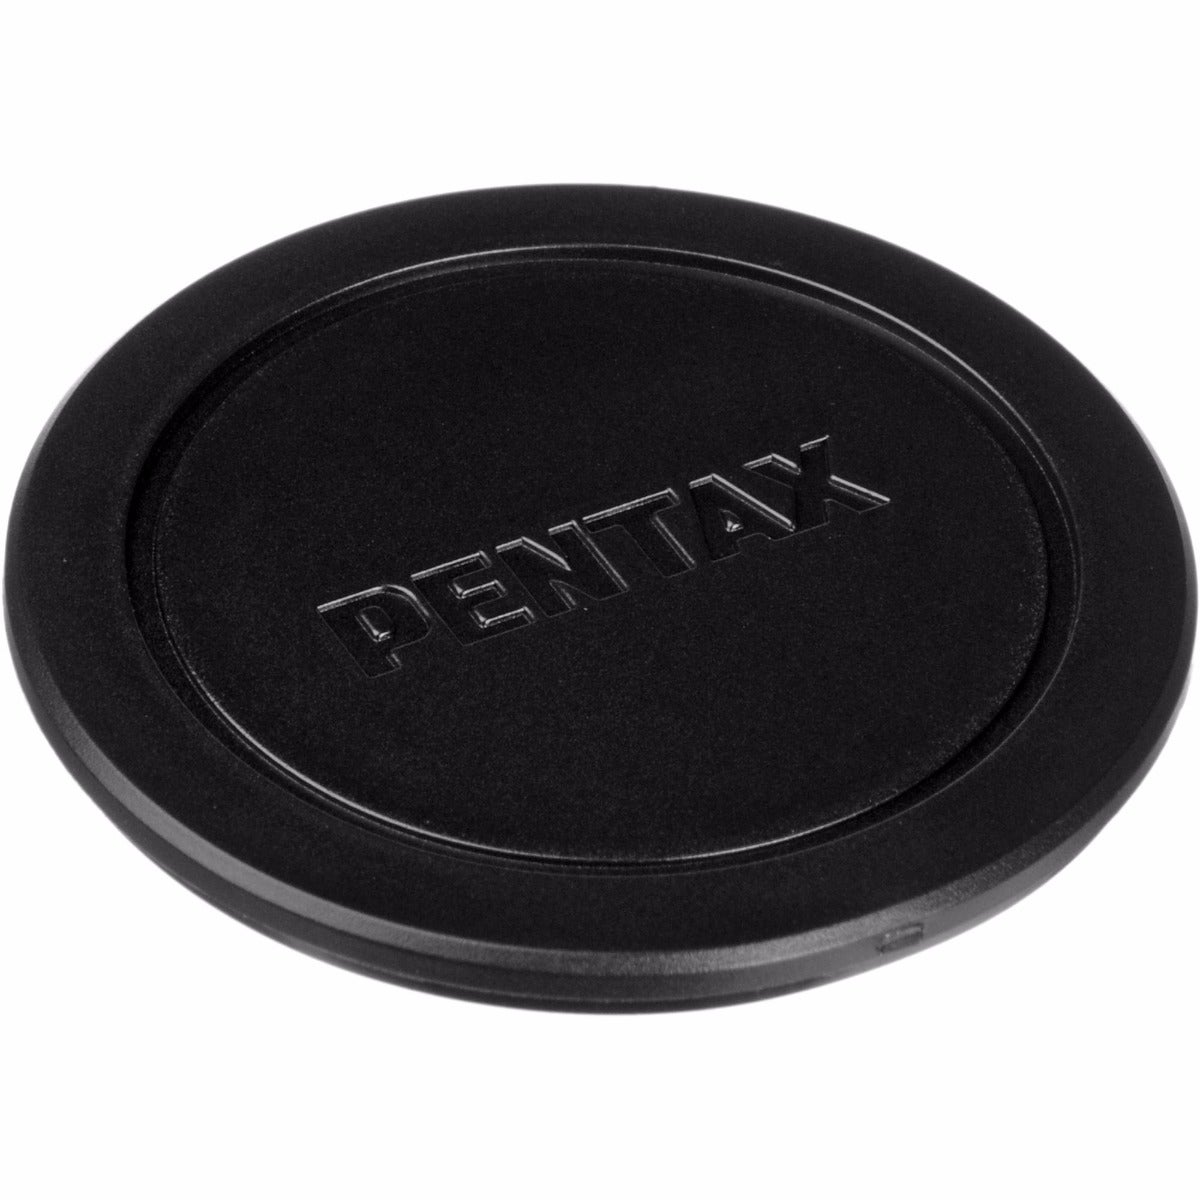 Image of Pentax Body Mount Cover